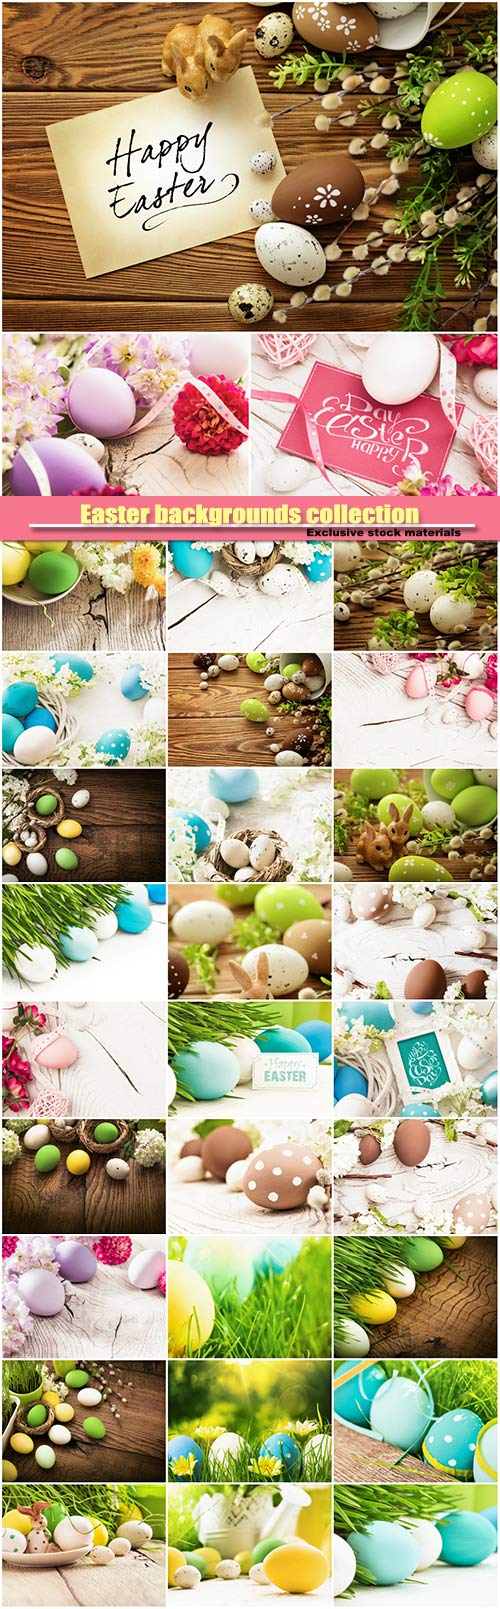 Easter backgrounds collection